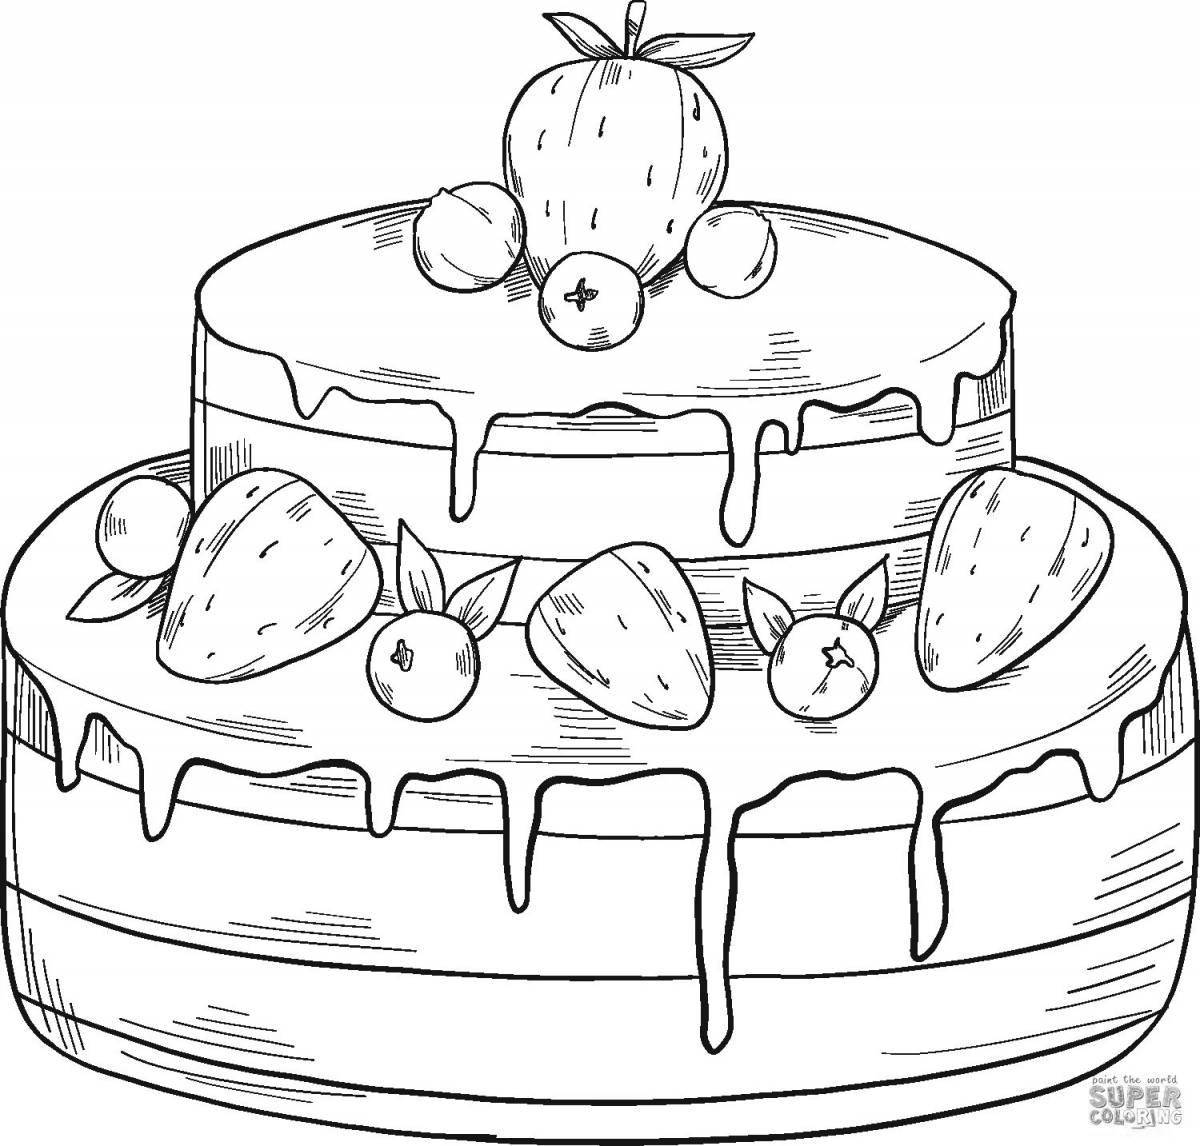 Fairy cake coloring pages for girls